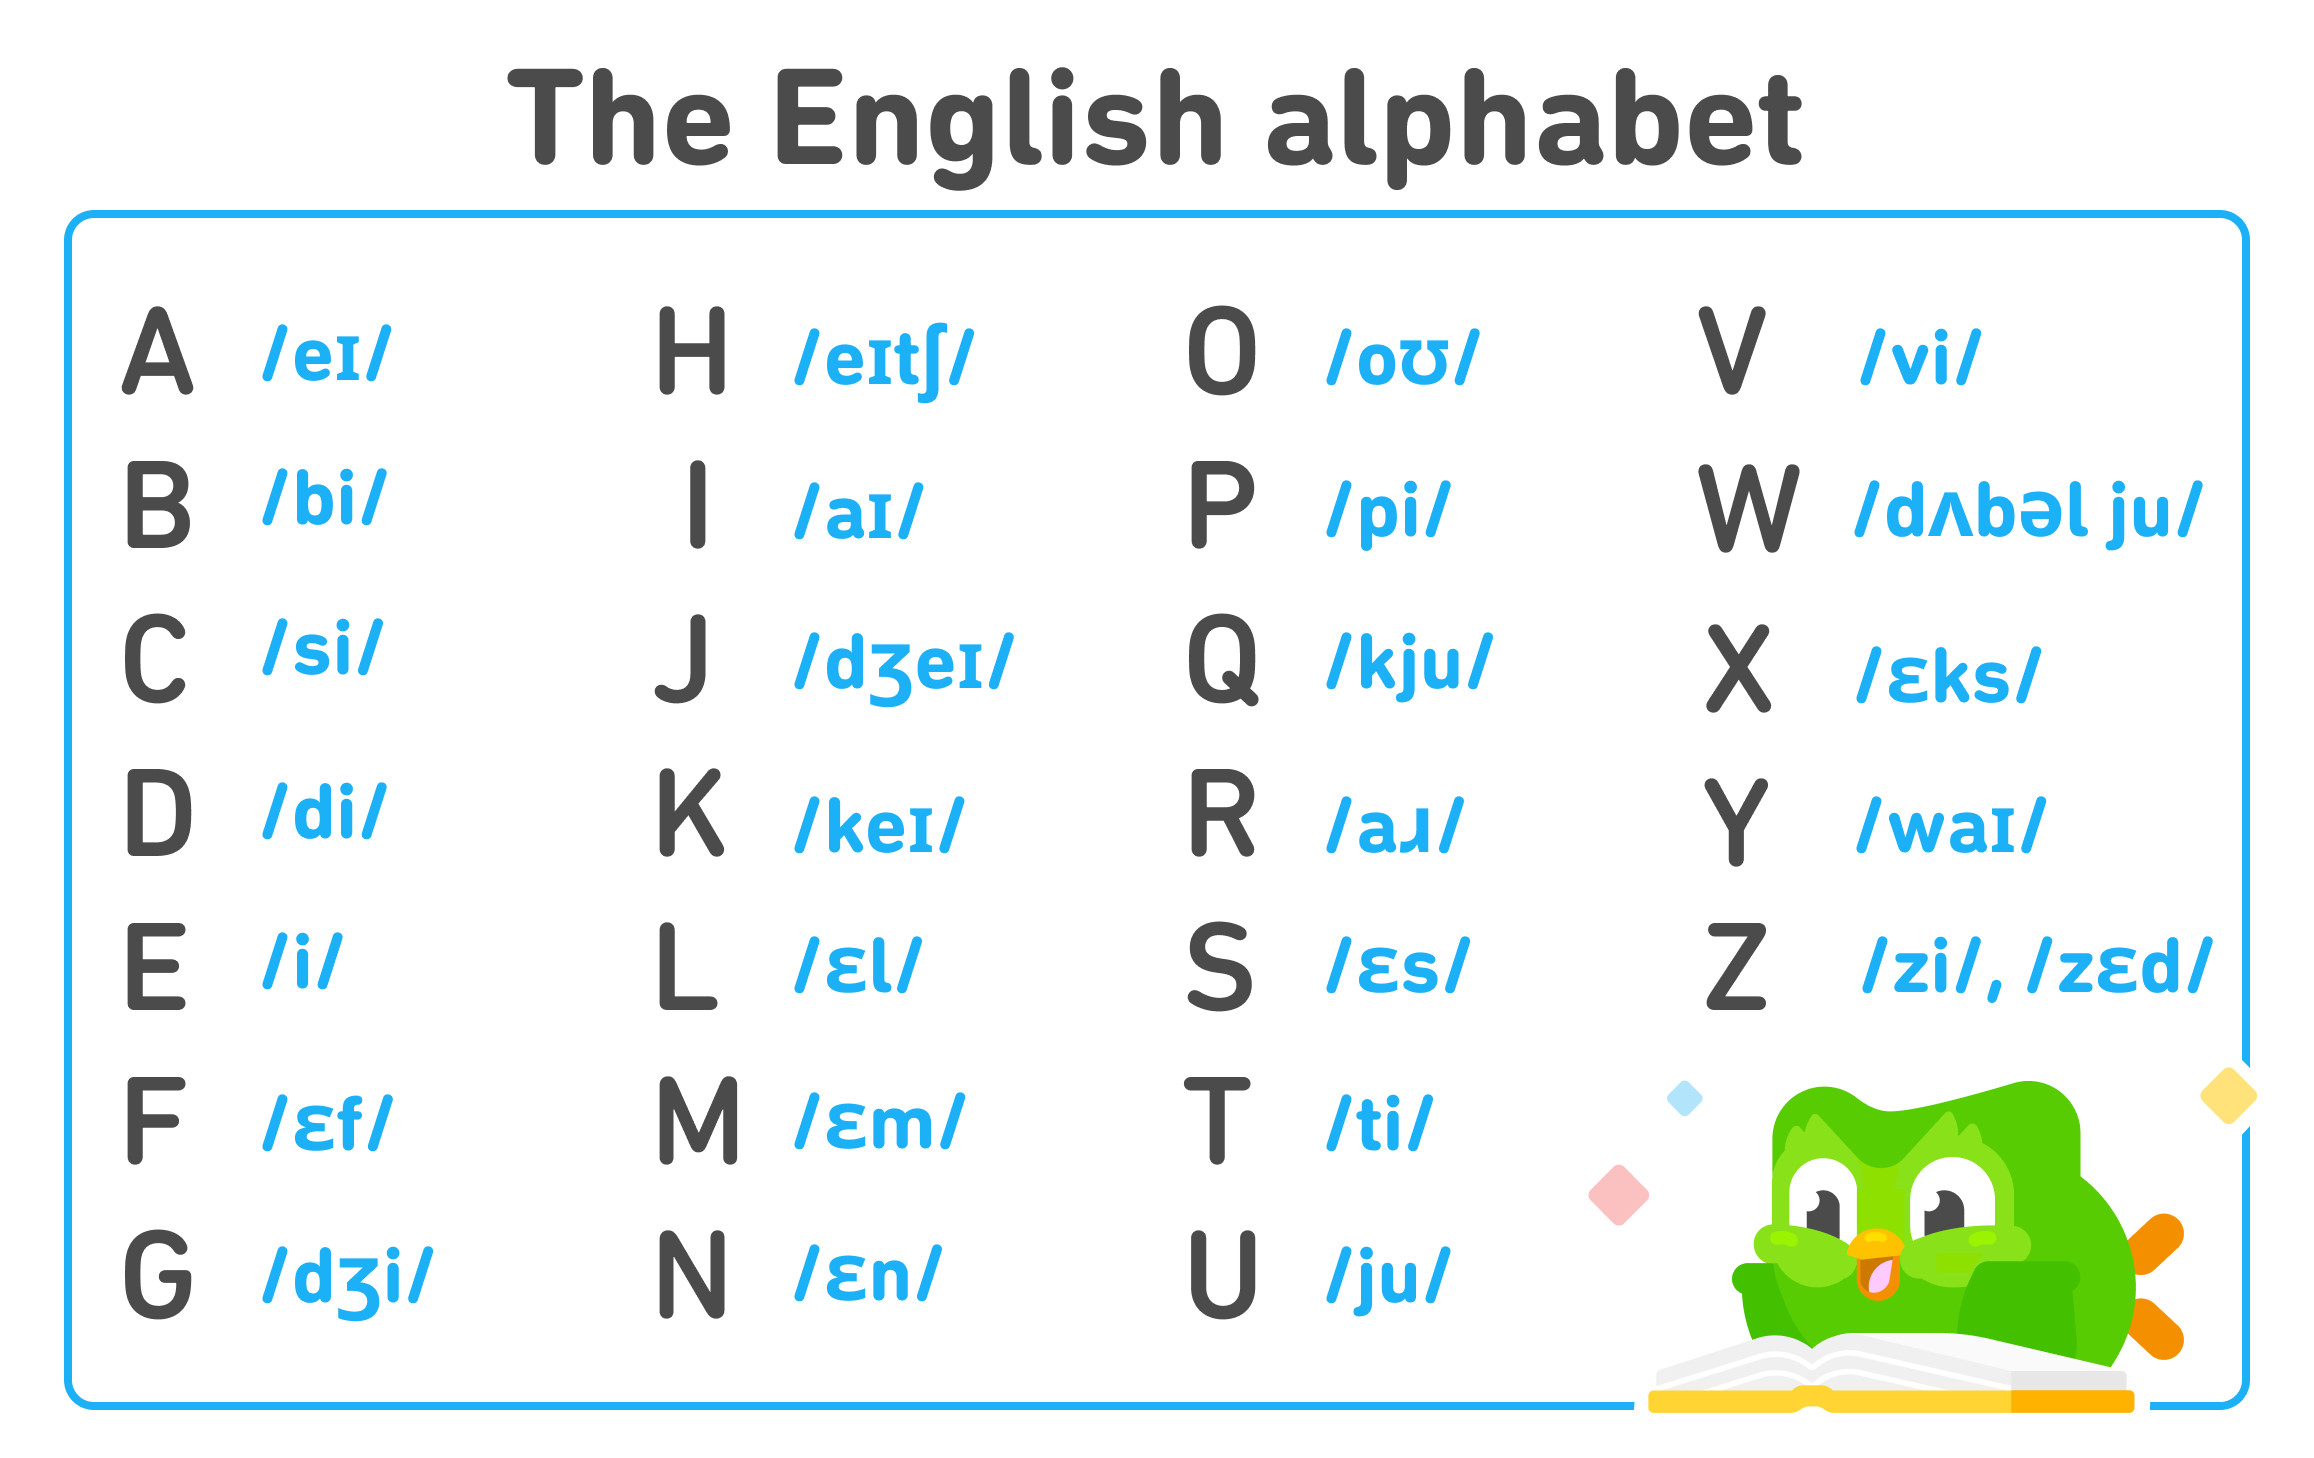 Chart of the English alphabet. The 26 letters are listed out and next to each is the International Phonetic Alphabet transcription of how to pronounce it: A /ei/, B /bi/, C /si/, D /di/, E /i/, F /ɛf/, G /dʒi/, H /eitʃ/, I /ai/, J /dʒei/, K /kei/, L /ɛl/, M /ɛm/, N /ɛn/, O /ou/, P /pi/, Q /kju/, R /aɹ/, S /ɛs/, T /ti/, U /ju/, V /vi/, W /dʌbəl ju/, X /ɛks/, Y /wai/, Z /zi/ or /zEd/.